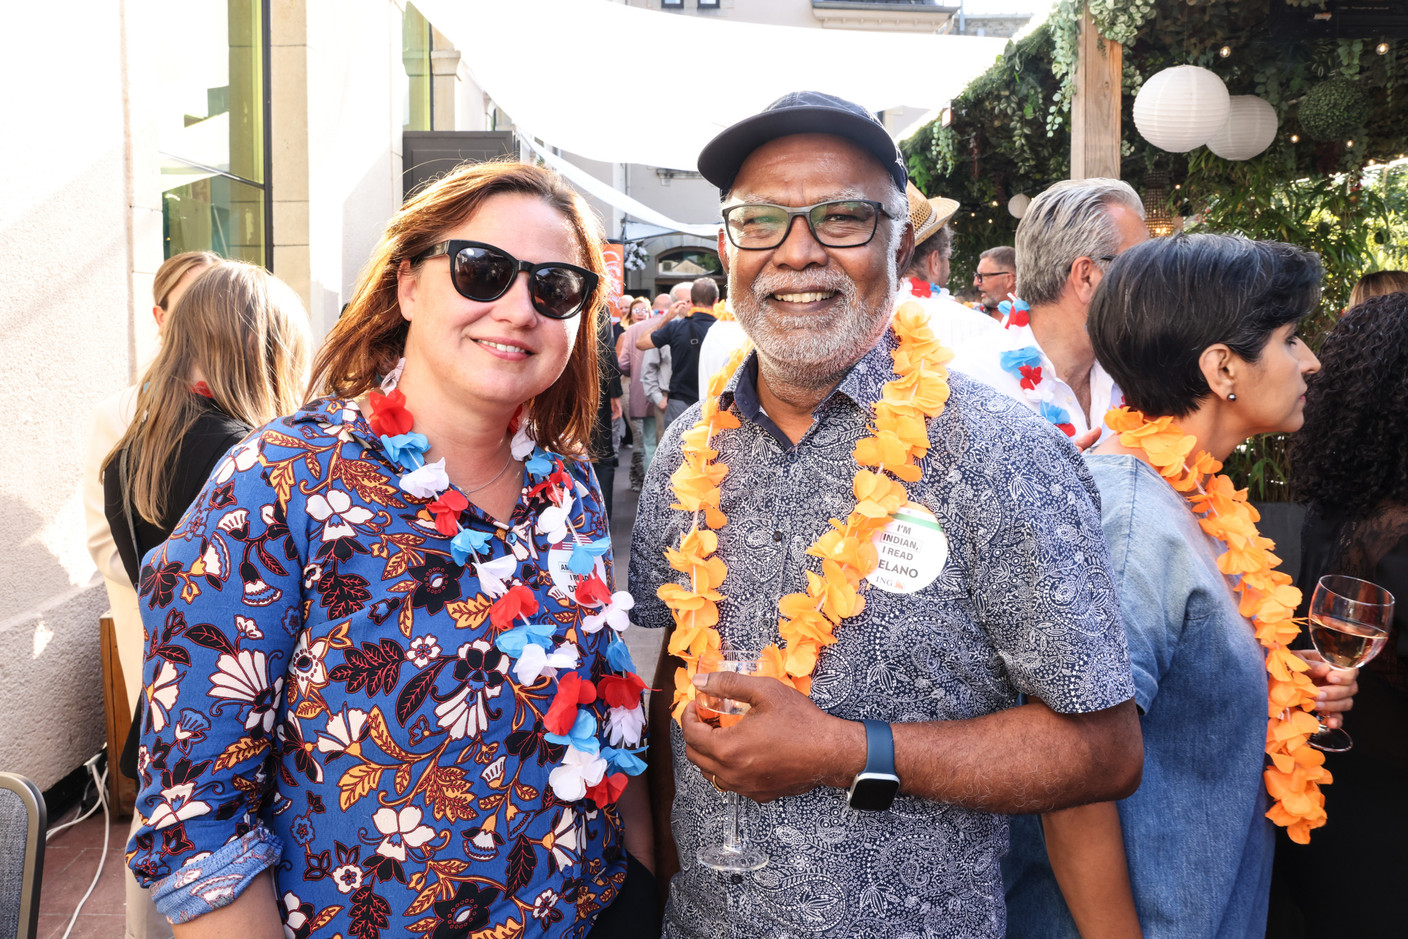 Natalie Gerhardstein (Arendt & Medernach) and Selvaraj Alagumalai (Indian Association Luxembourg) seen during the Delano summer party, 13 July 2023. Photo: Marie Russillo / Maison Moderne